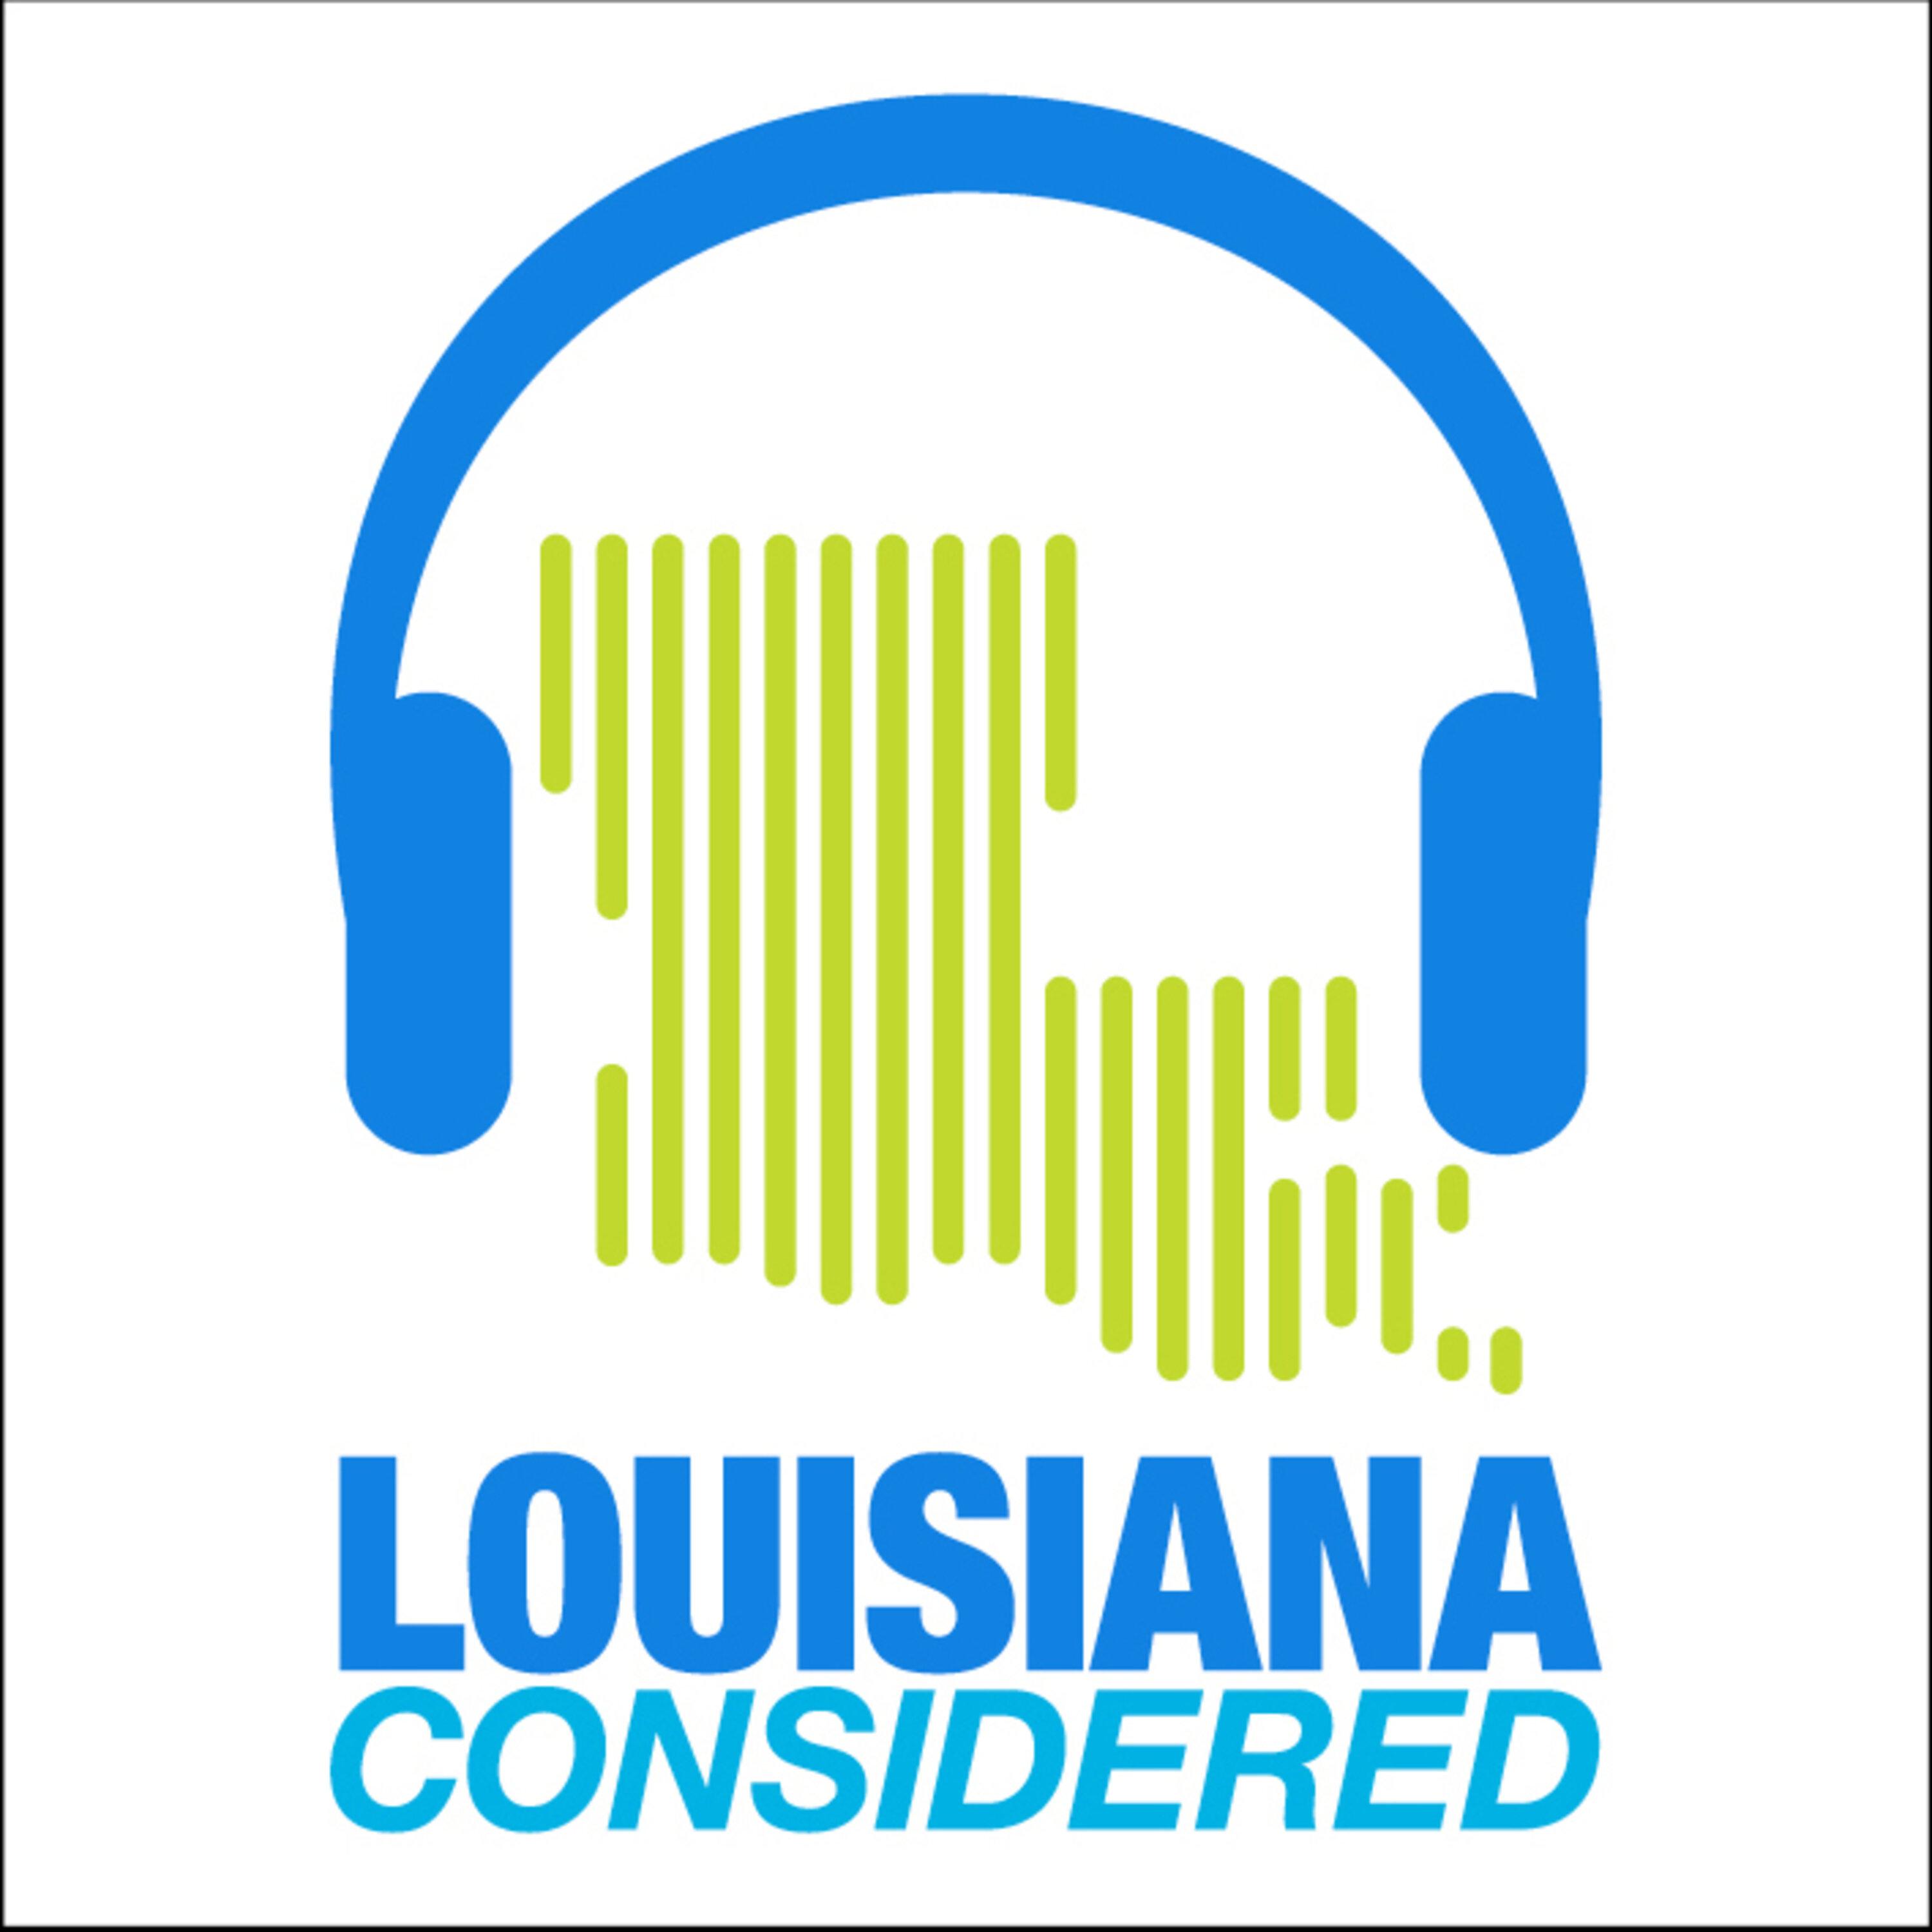 Thumbnail for "Louisiana Considered: Reproductive Rights Are At Stake In The Supreme Court, Saints Owner Wants Team To Remain In New Orleans".